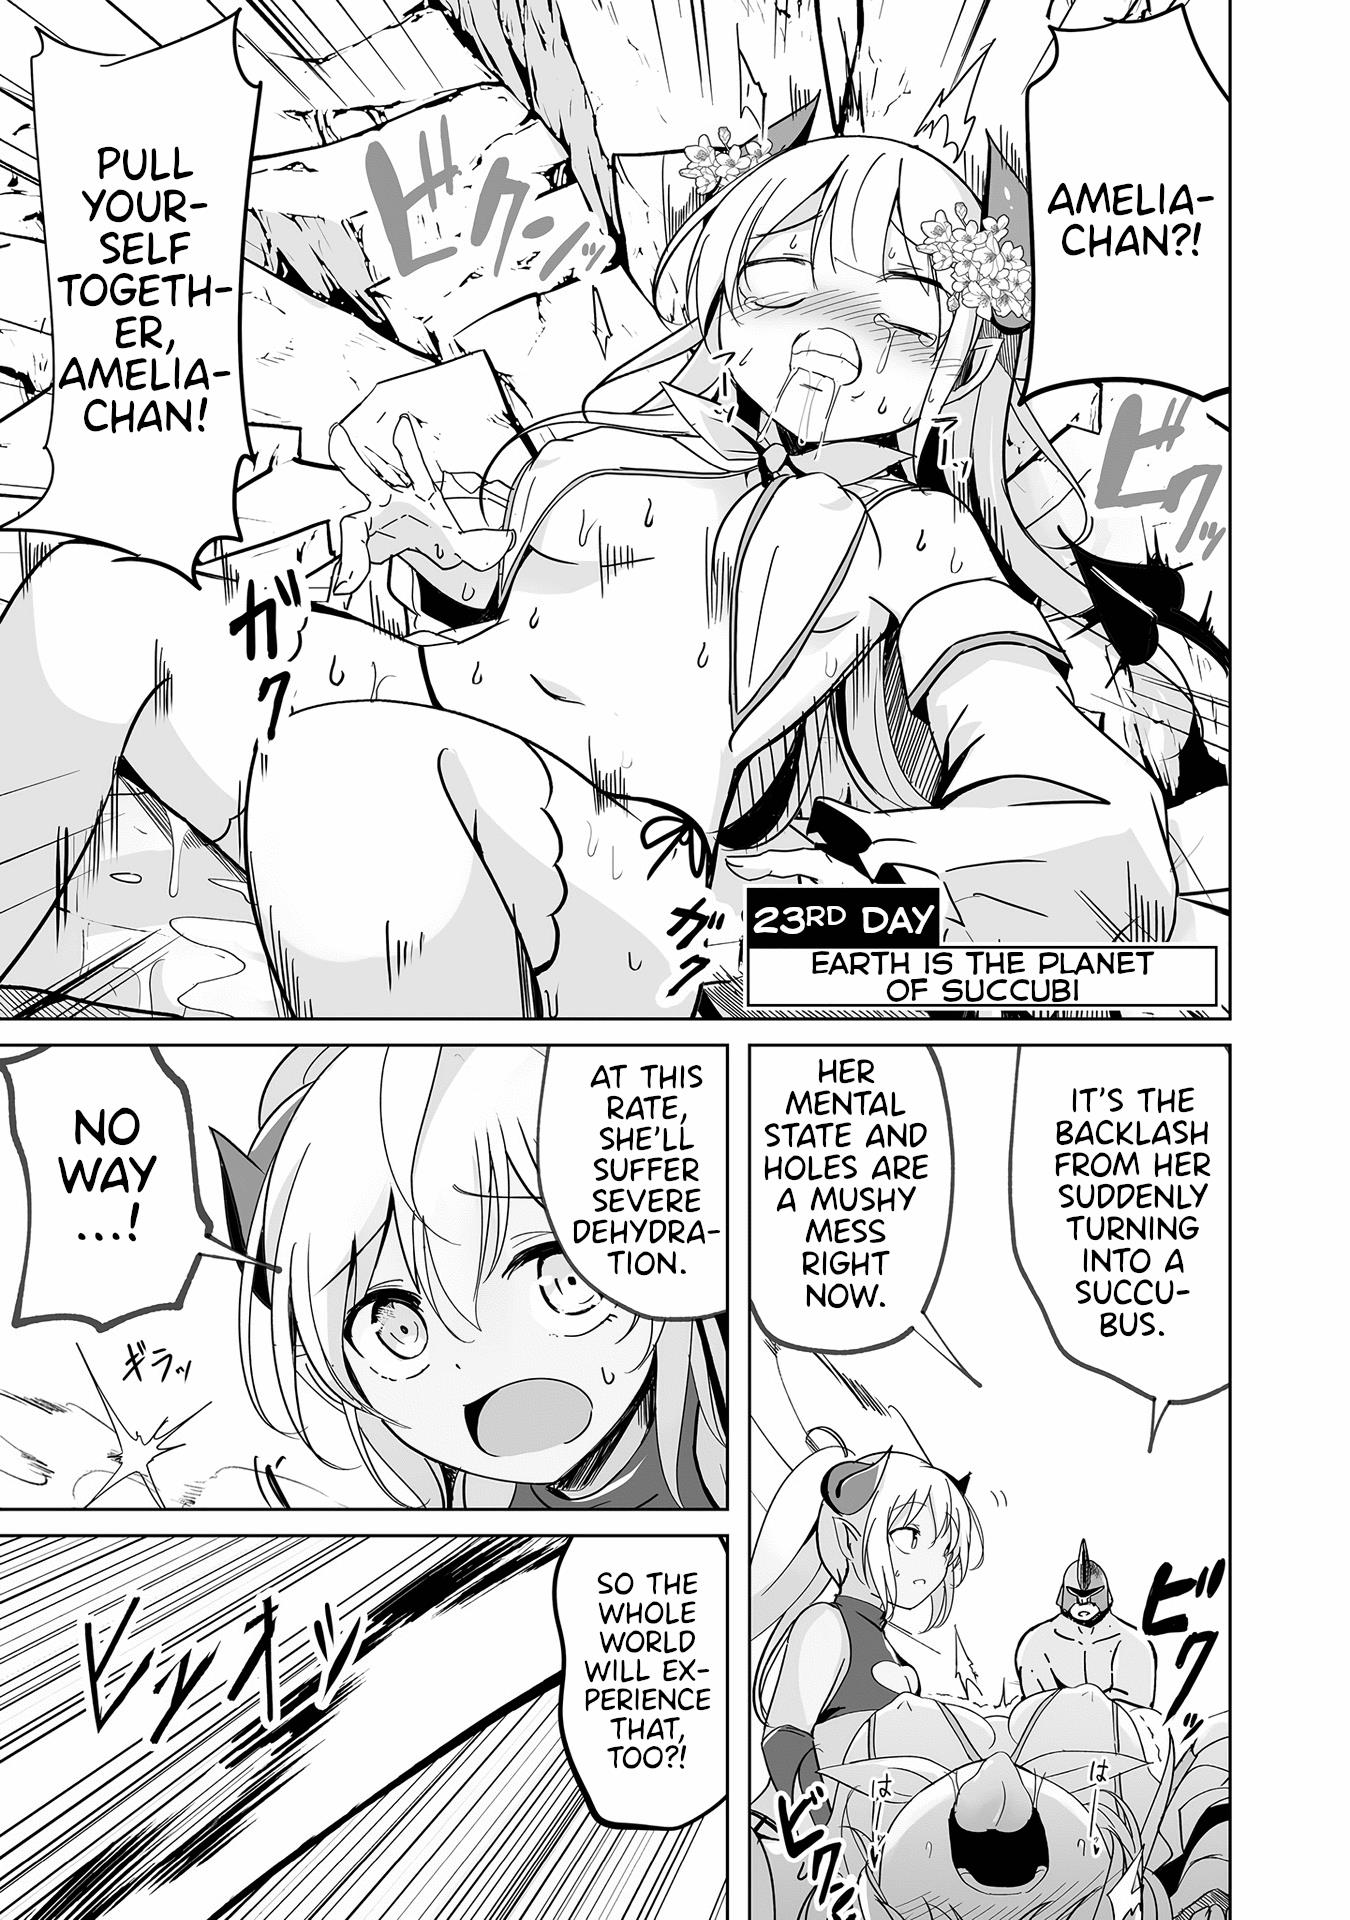 Dunking On Succubi In Another World Vol.4 Chapter 23: Earth Is The Planet Of Succubi - Picture 1